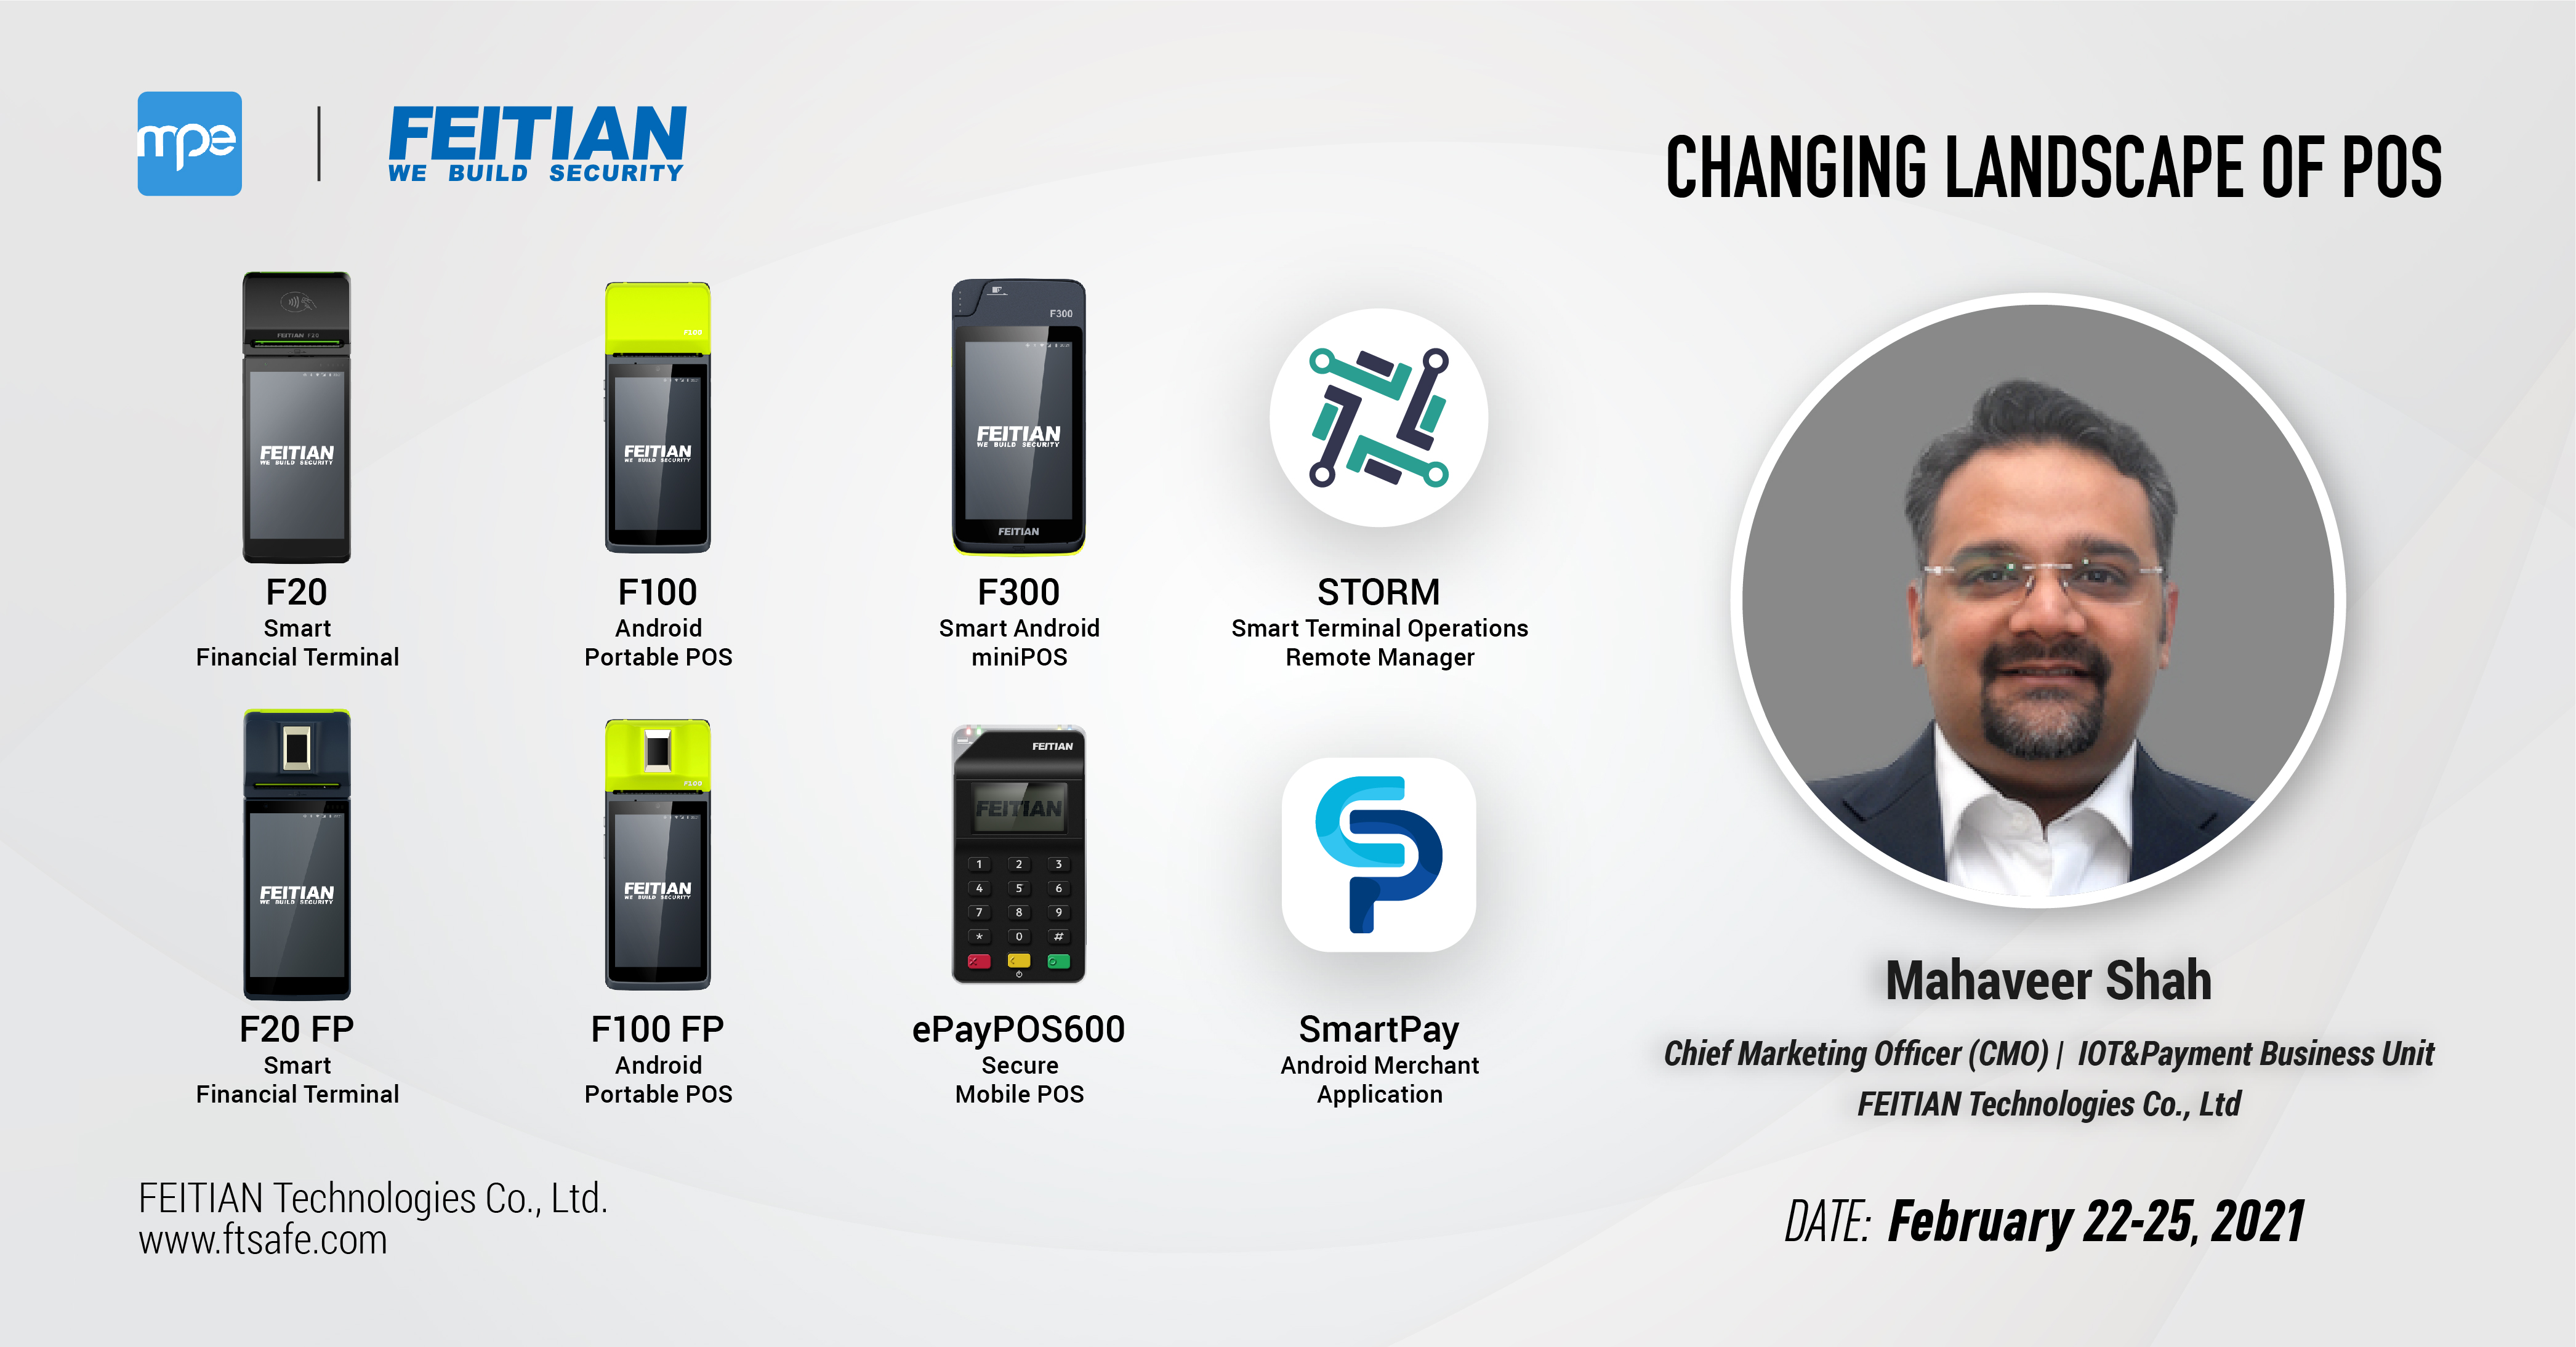 Mahaveer Shah delivered the speech titled “The Changing Landscape of POS”